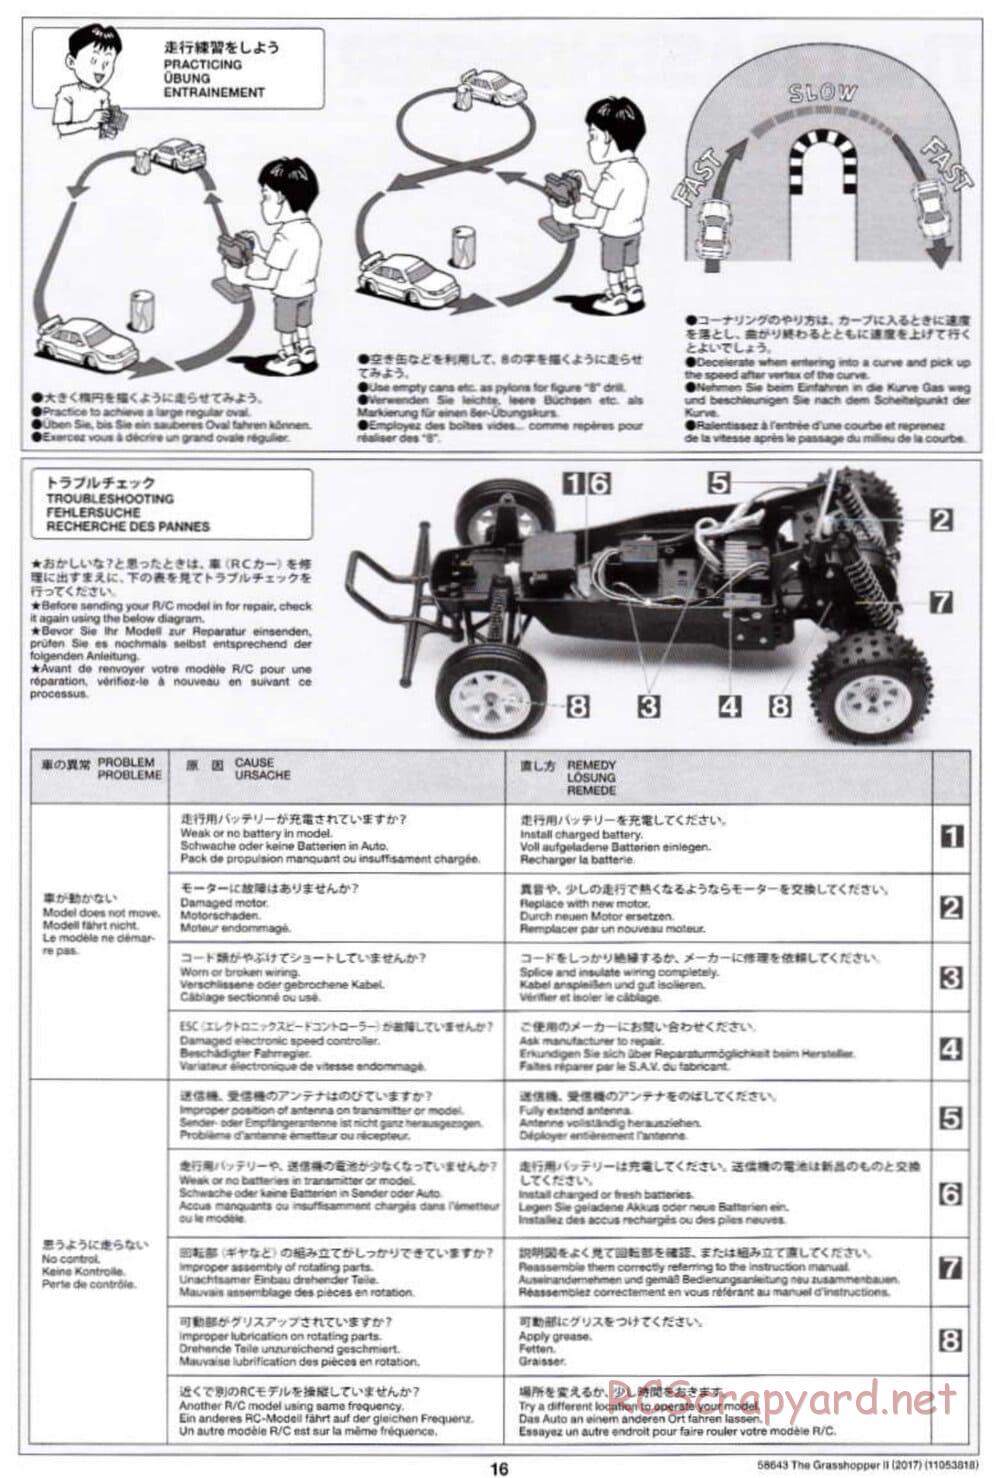 Tamiya - The Grasshopper II (2017) - GH Chassis - Manual - Page 16